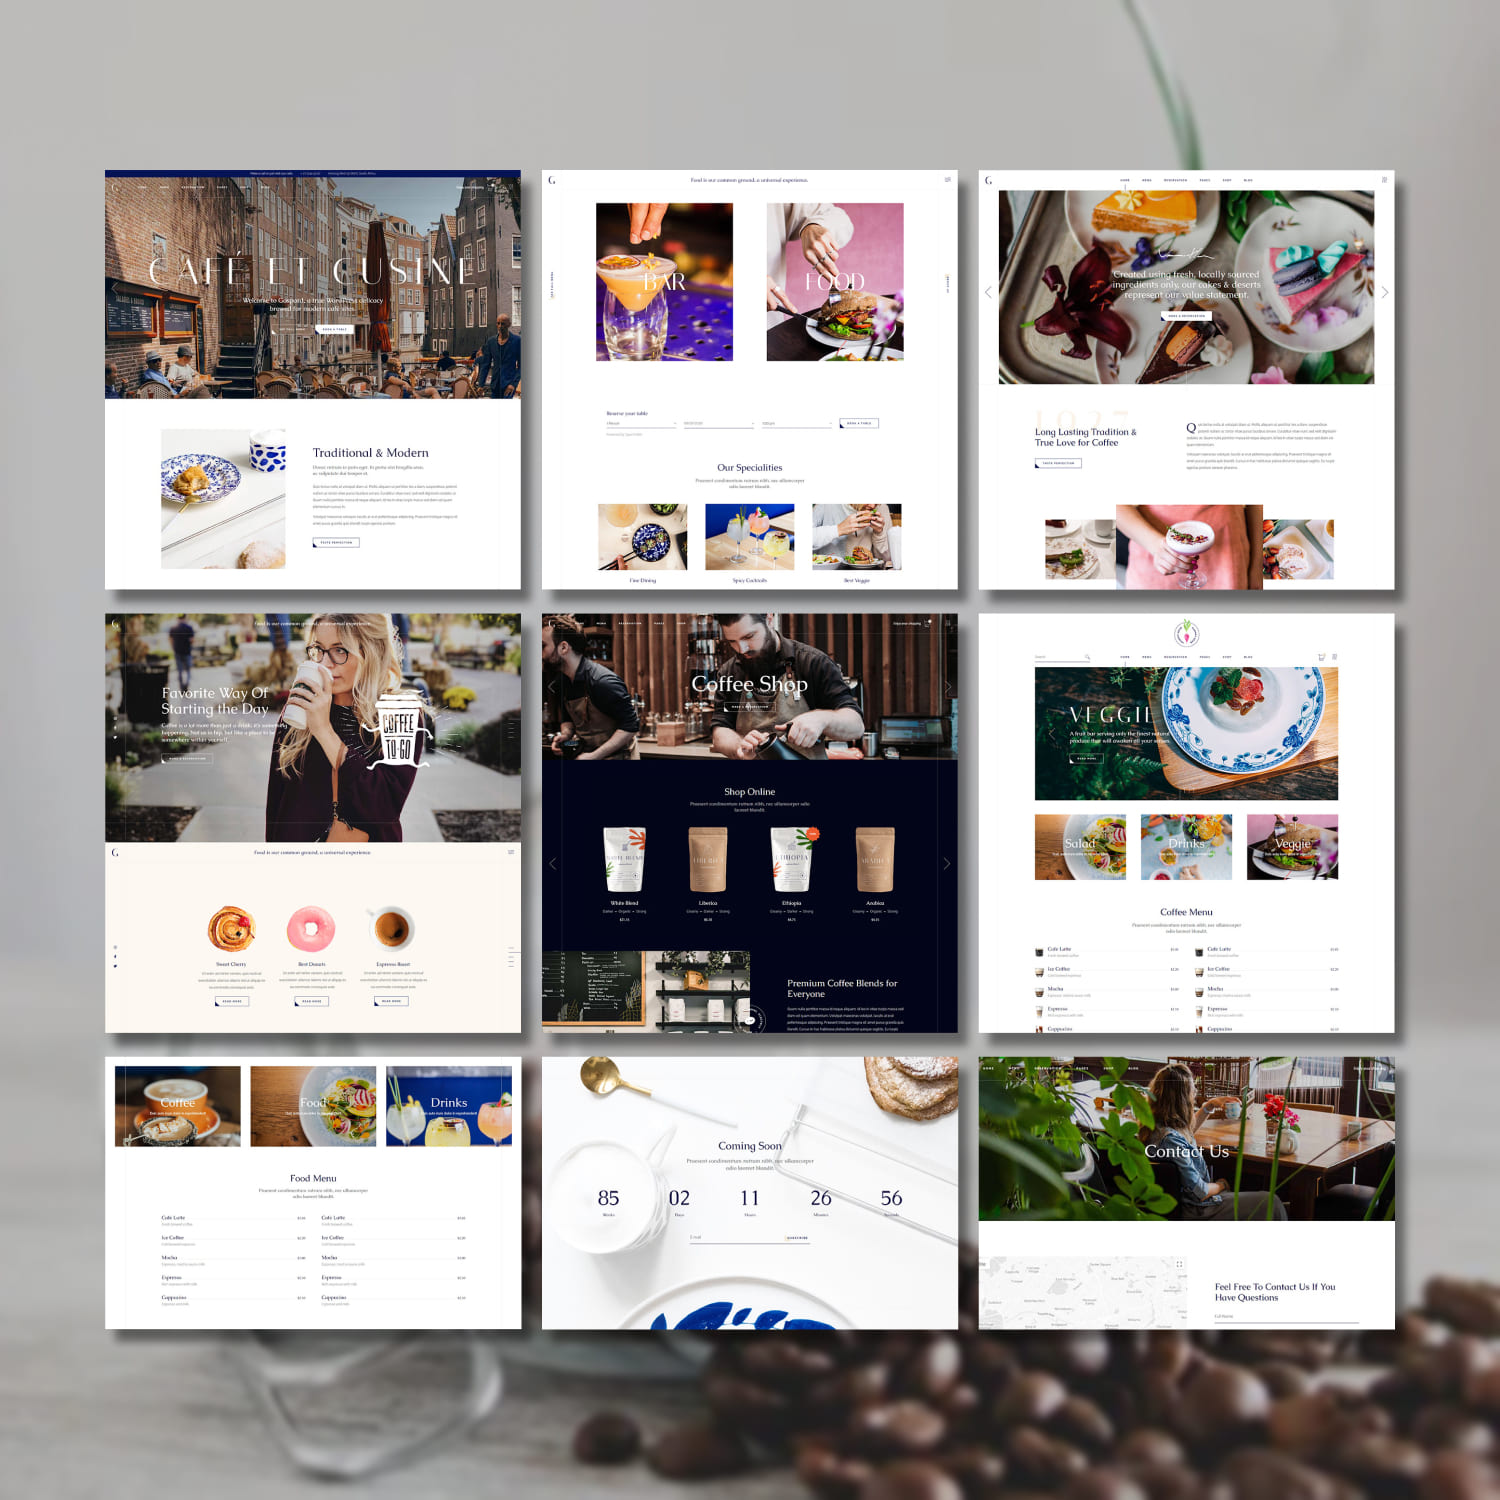 A selection of great restaurant theme WordPress pages.